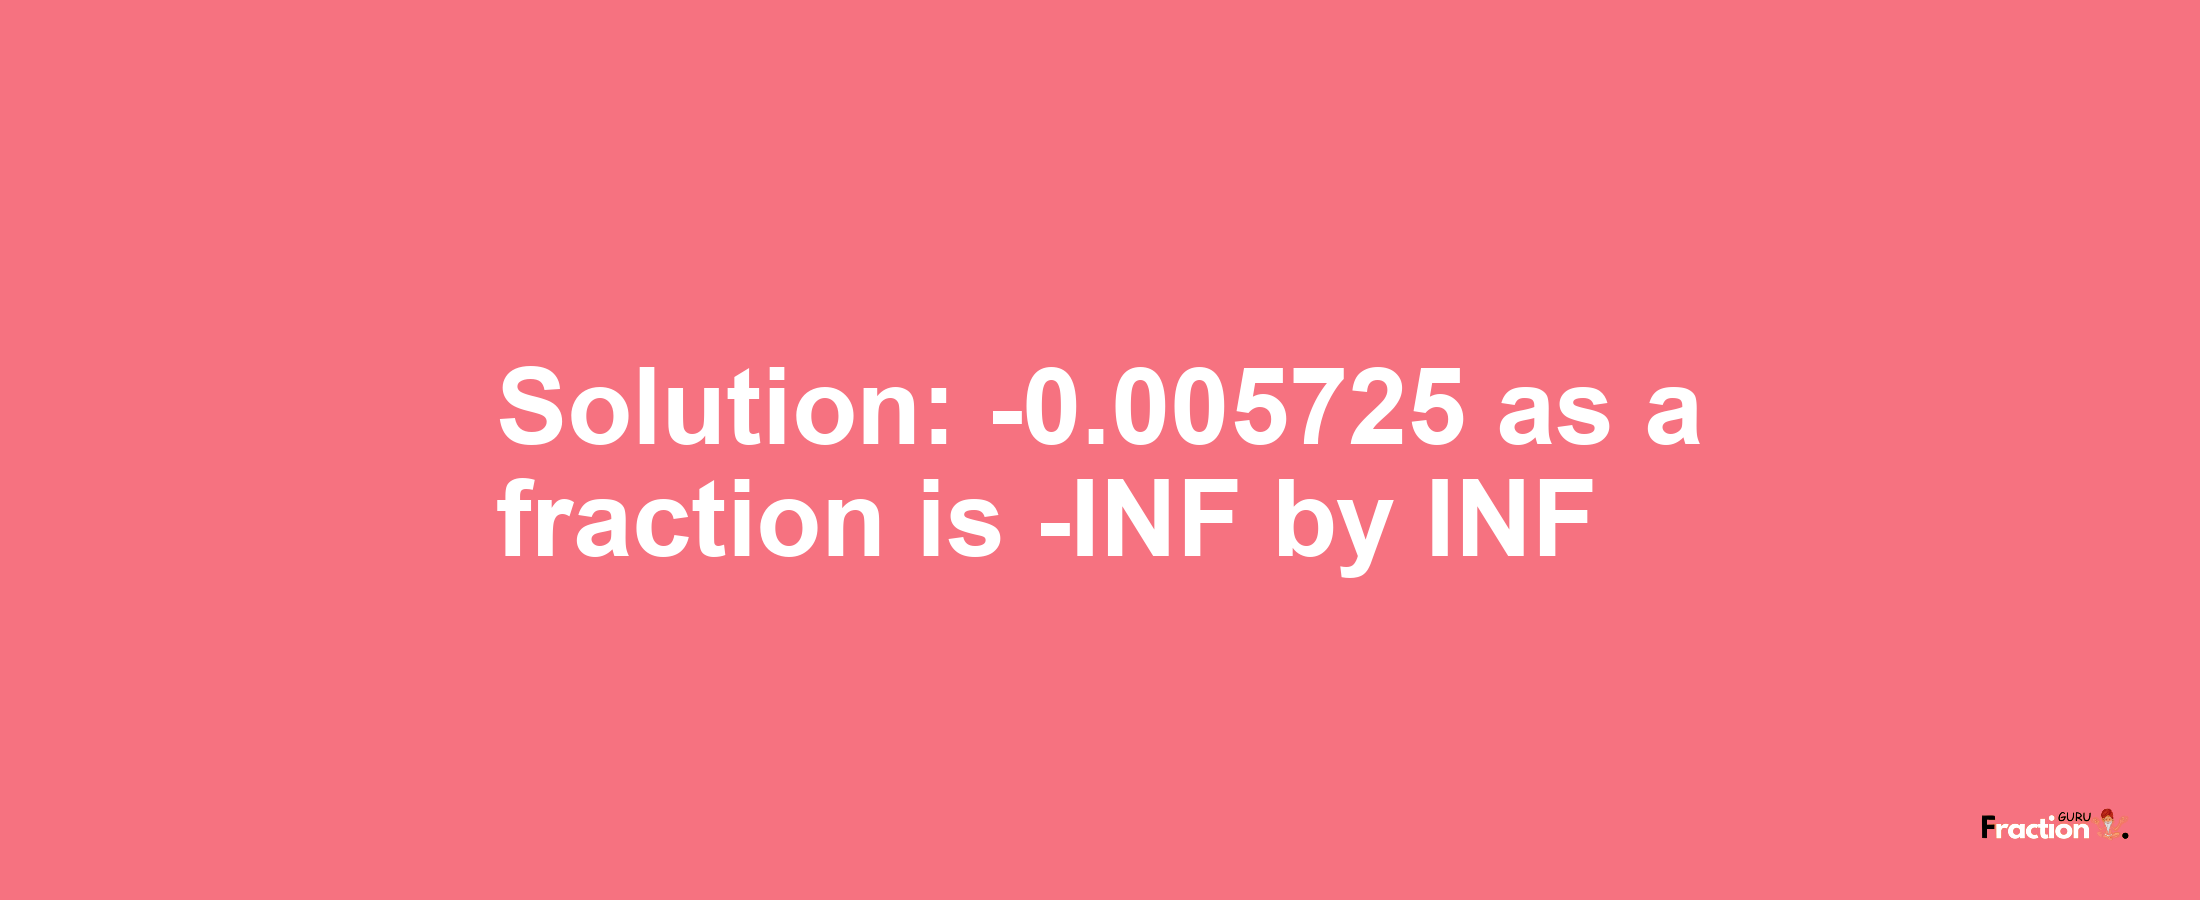 Solution:-0.005725 as a fraction is -INF/INF